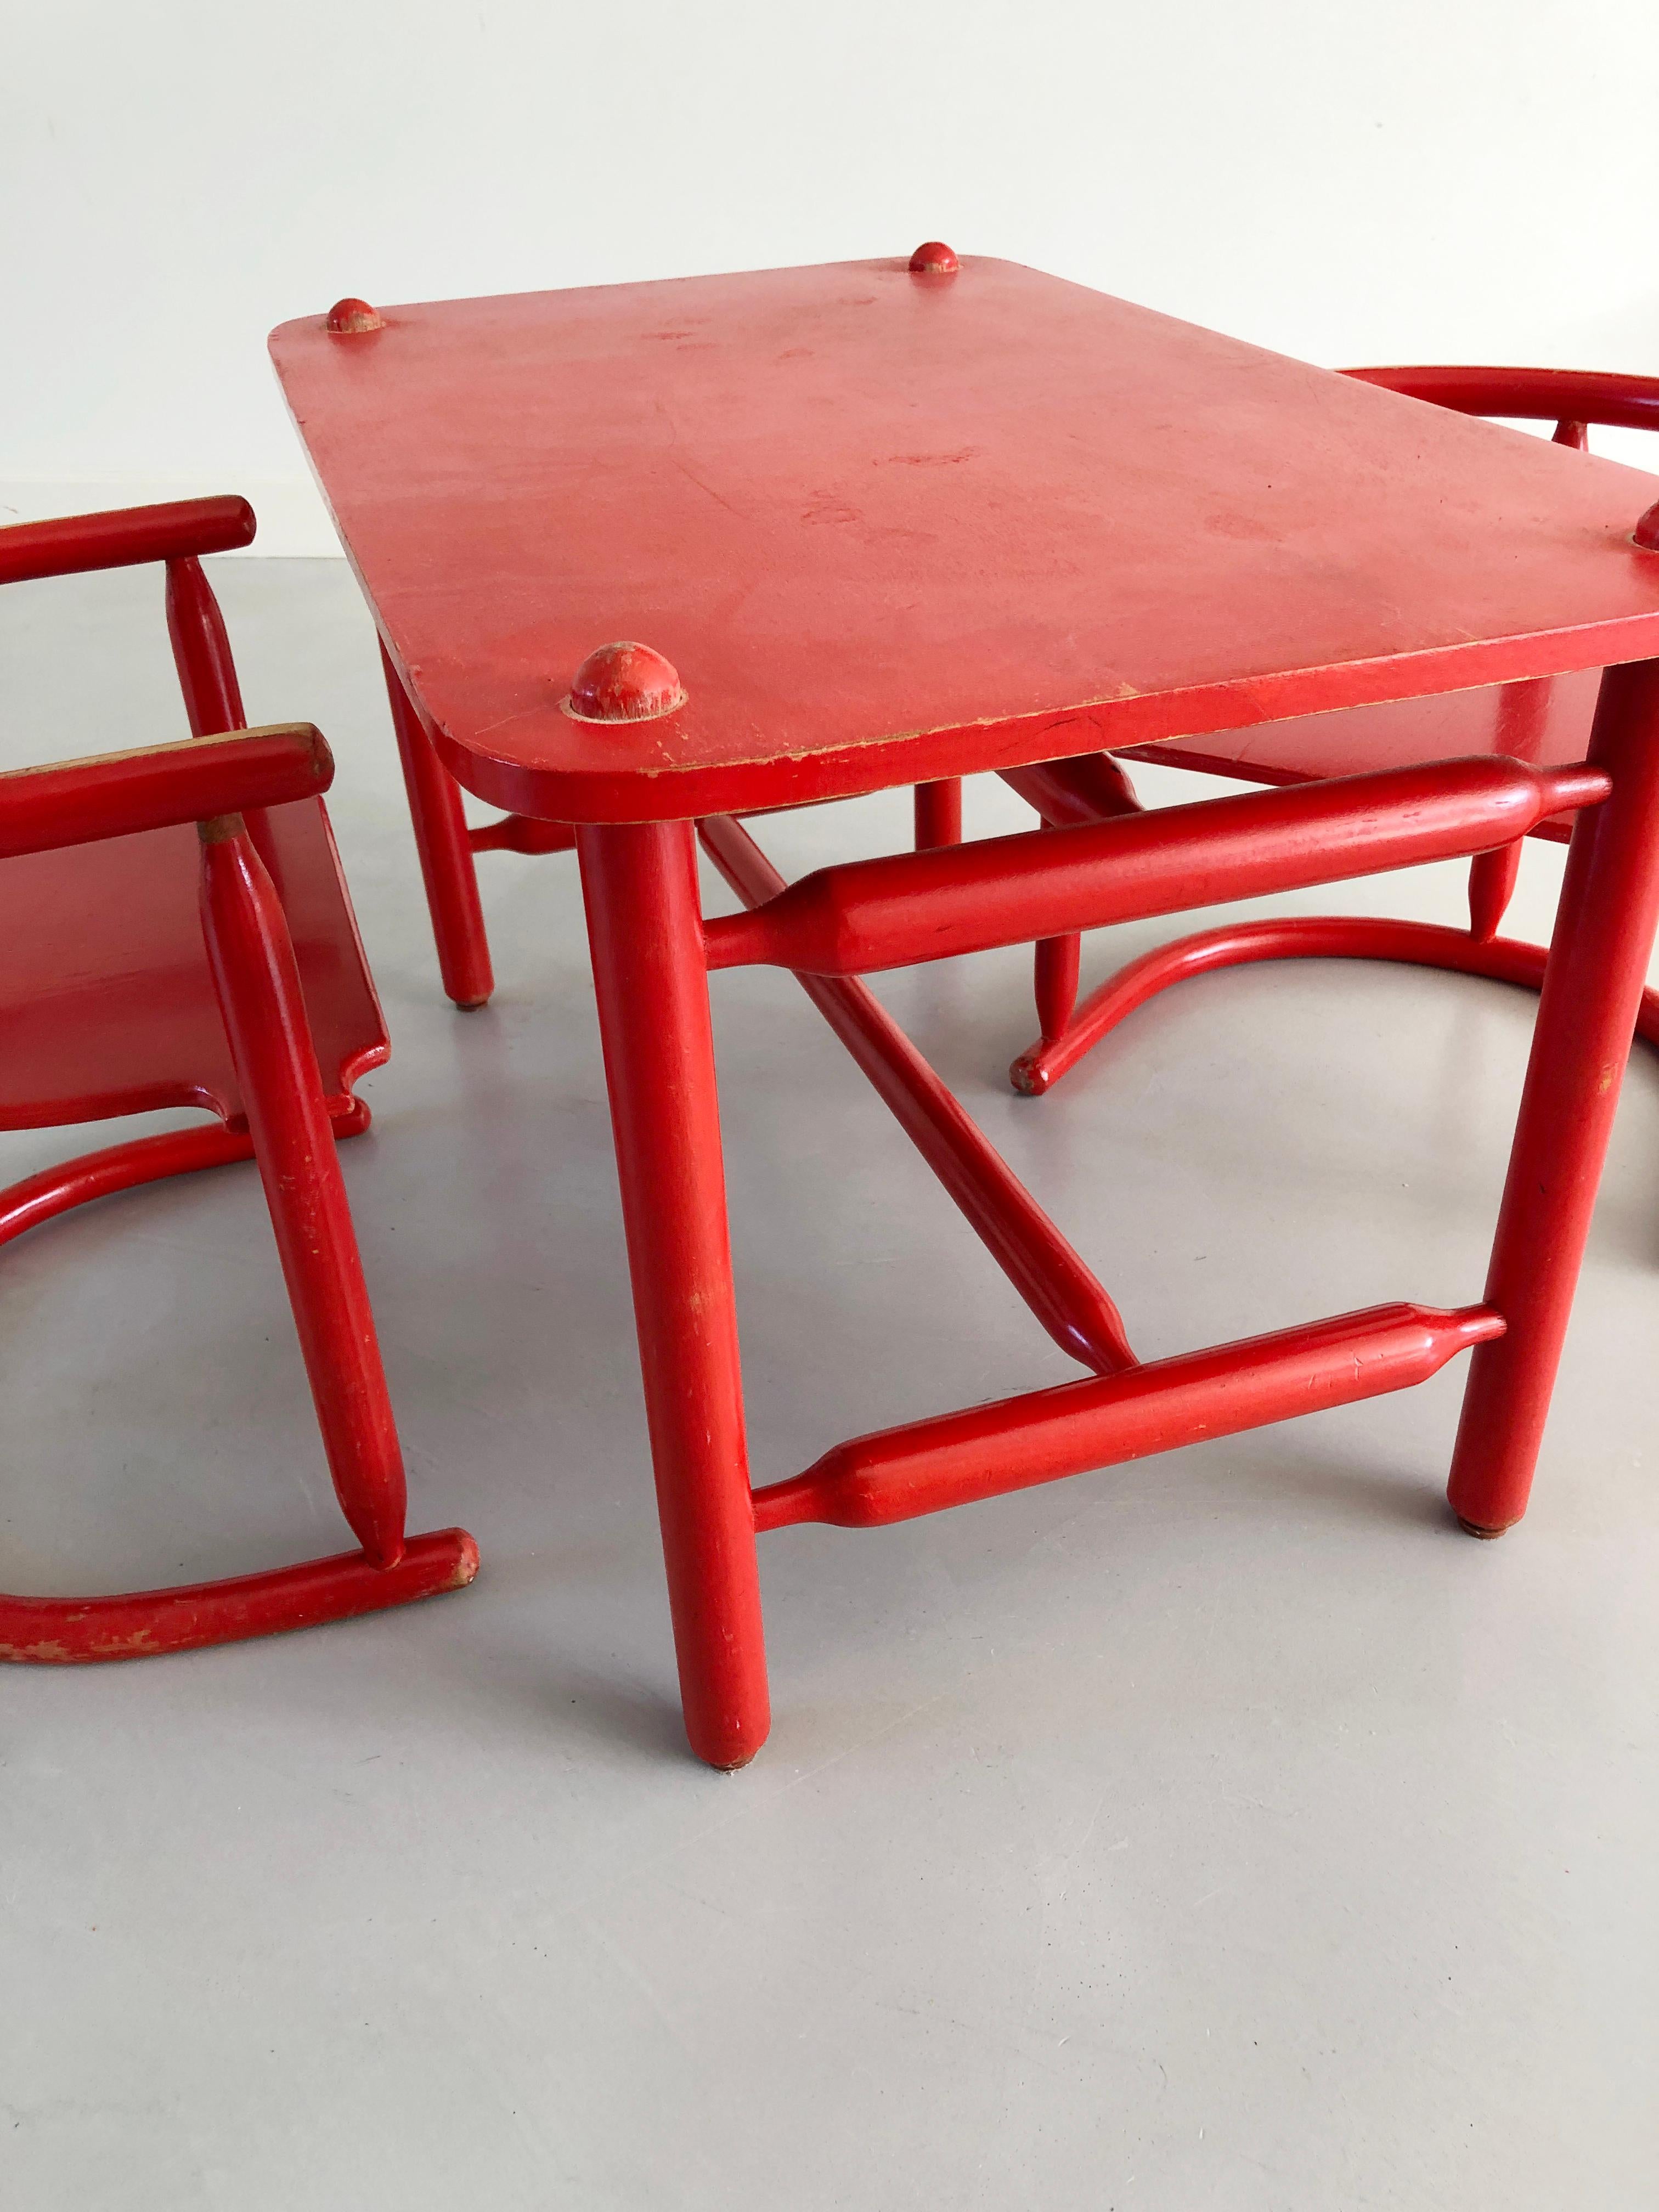 2 Chairs & Table set Anna - Karin Mobring for IKEA 1963 - Original paint For Sale 6